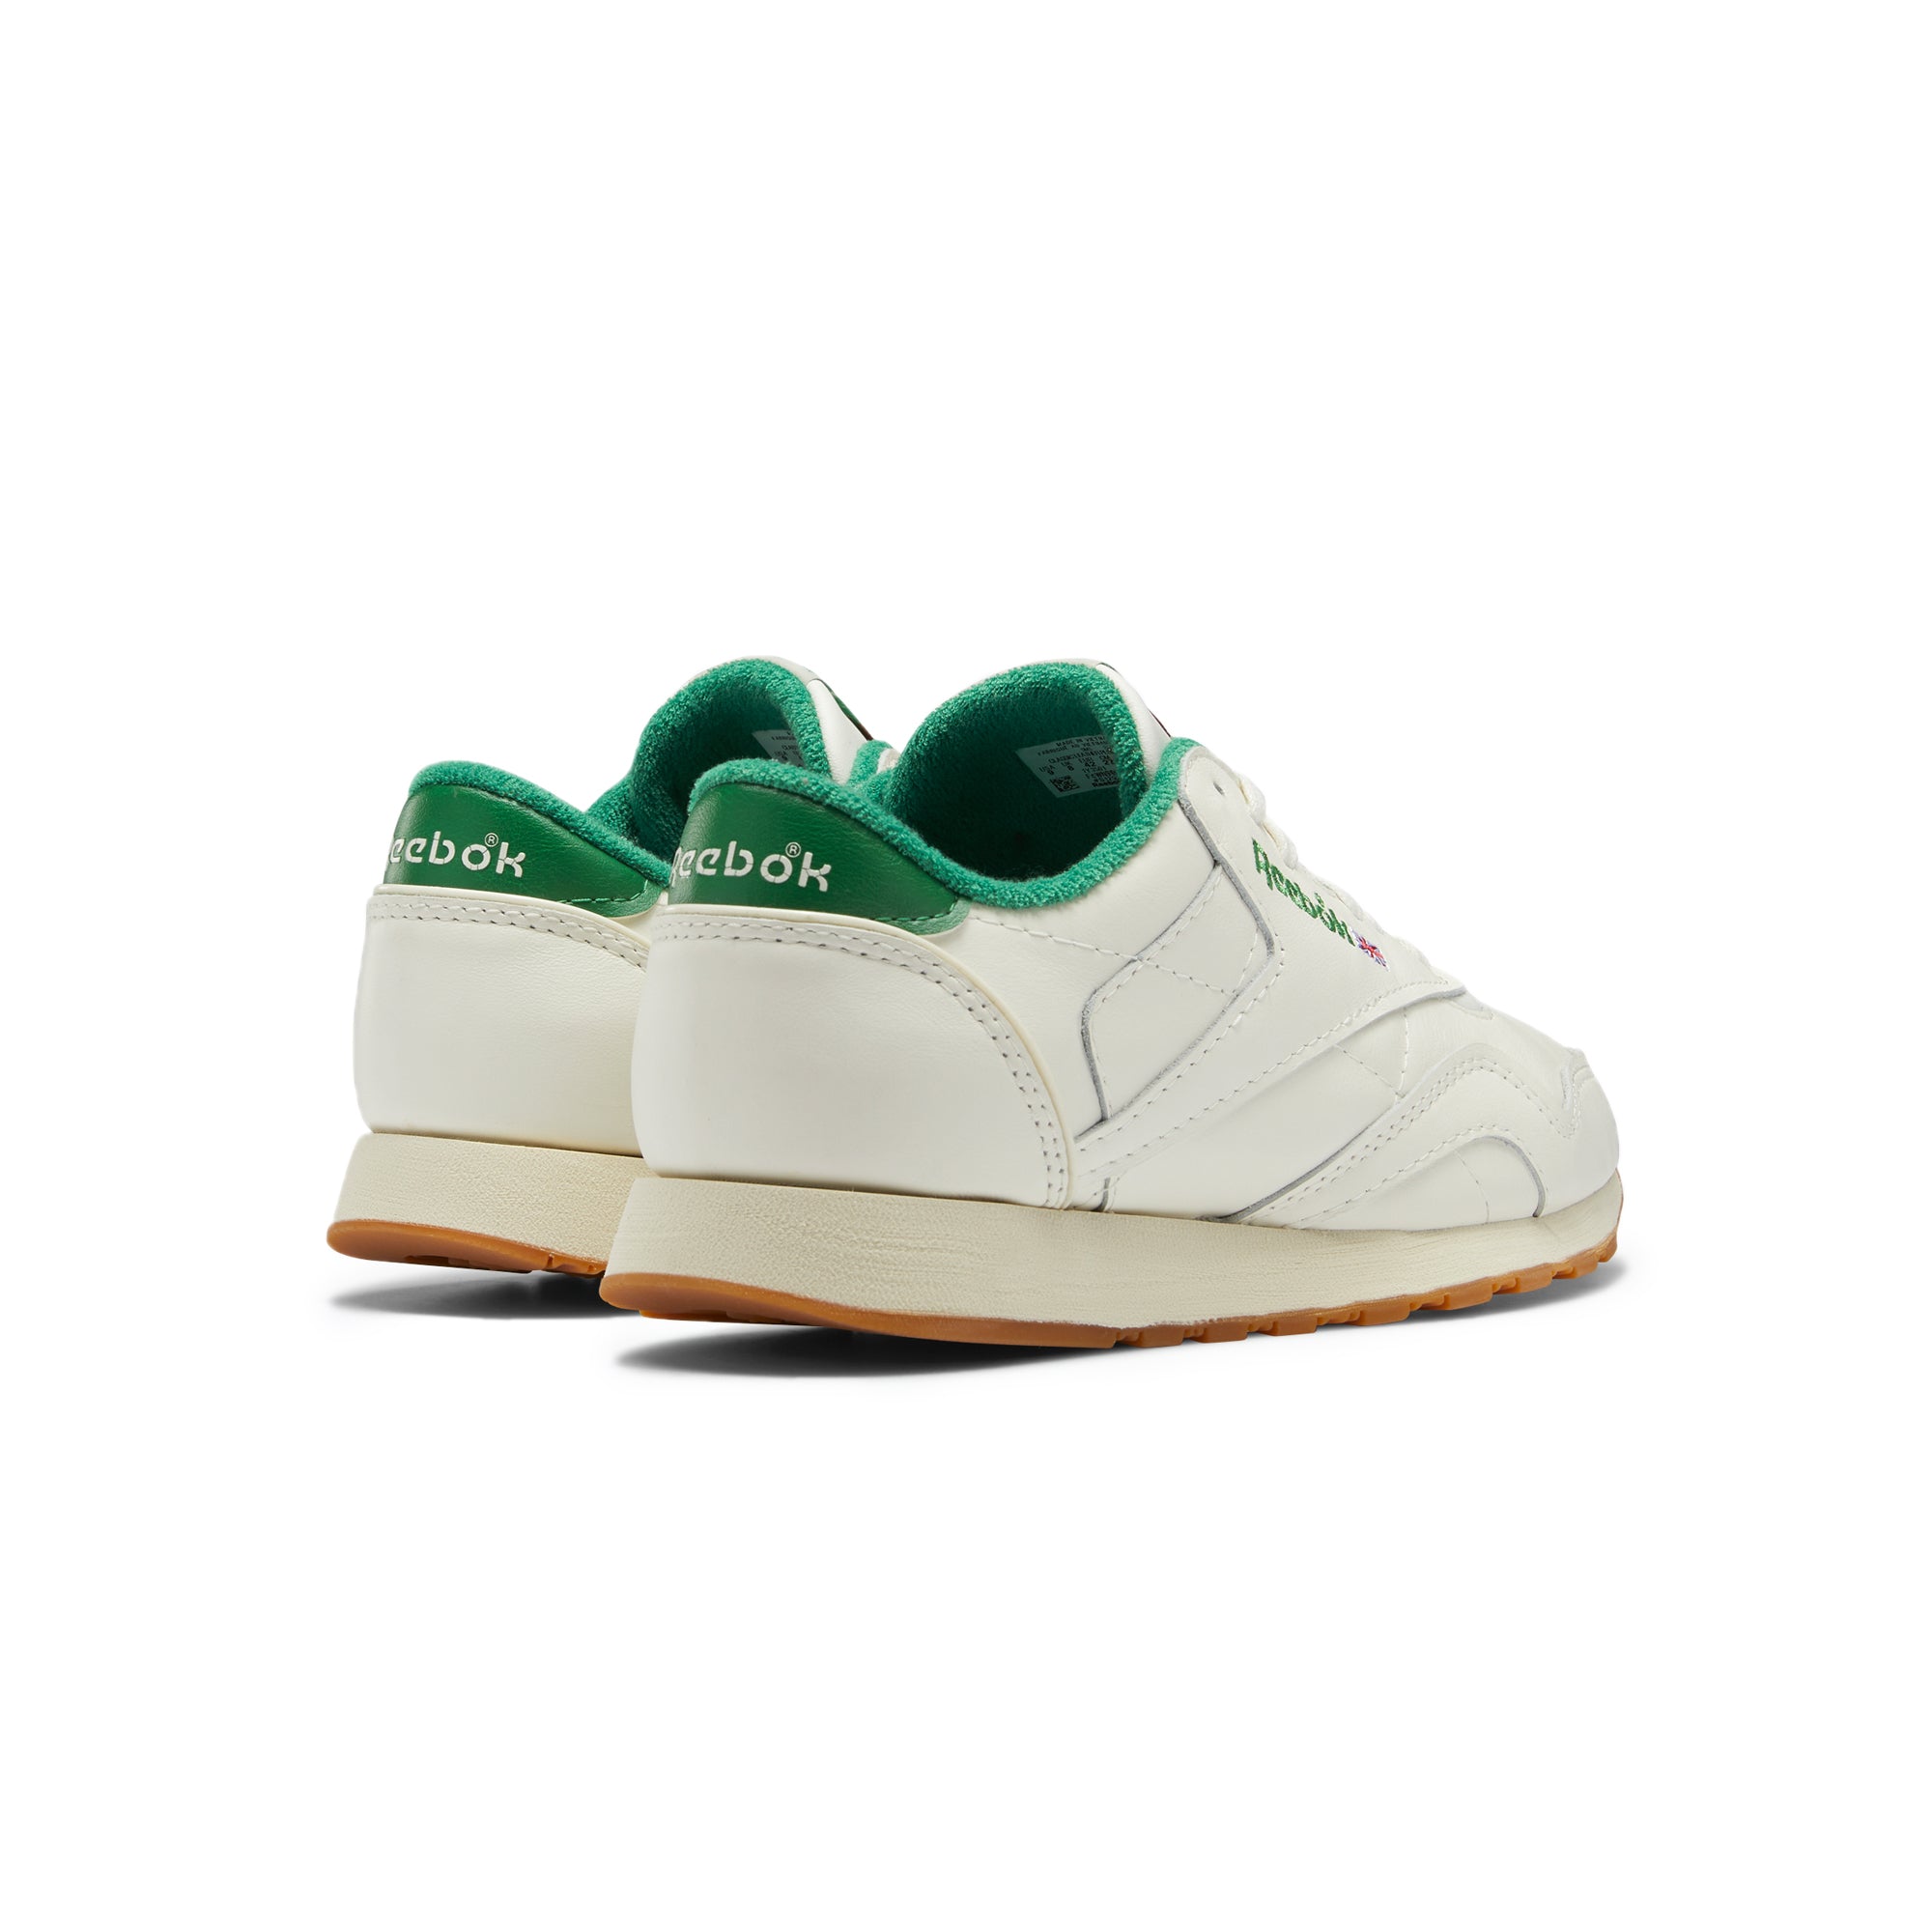 Shoes Reebok Classic Leather – Butter Extra Plus